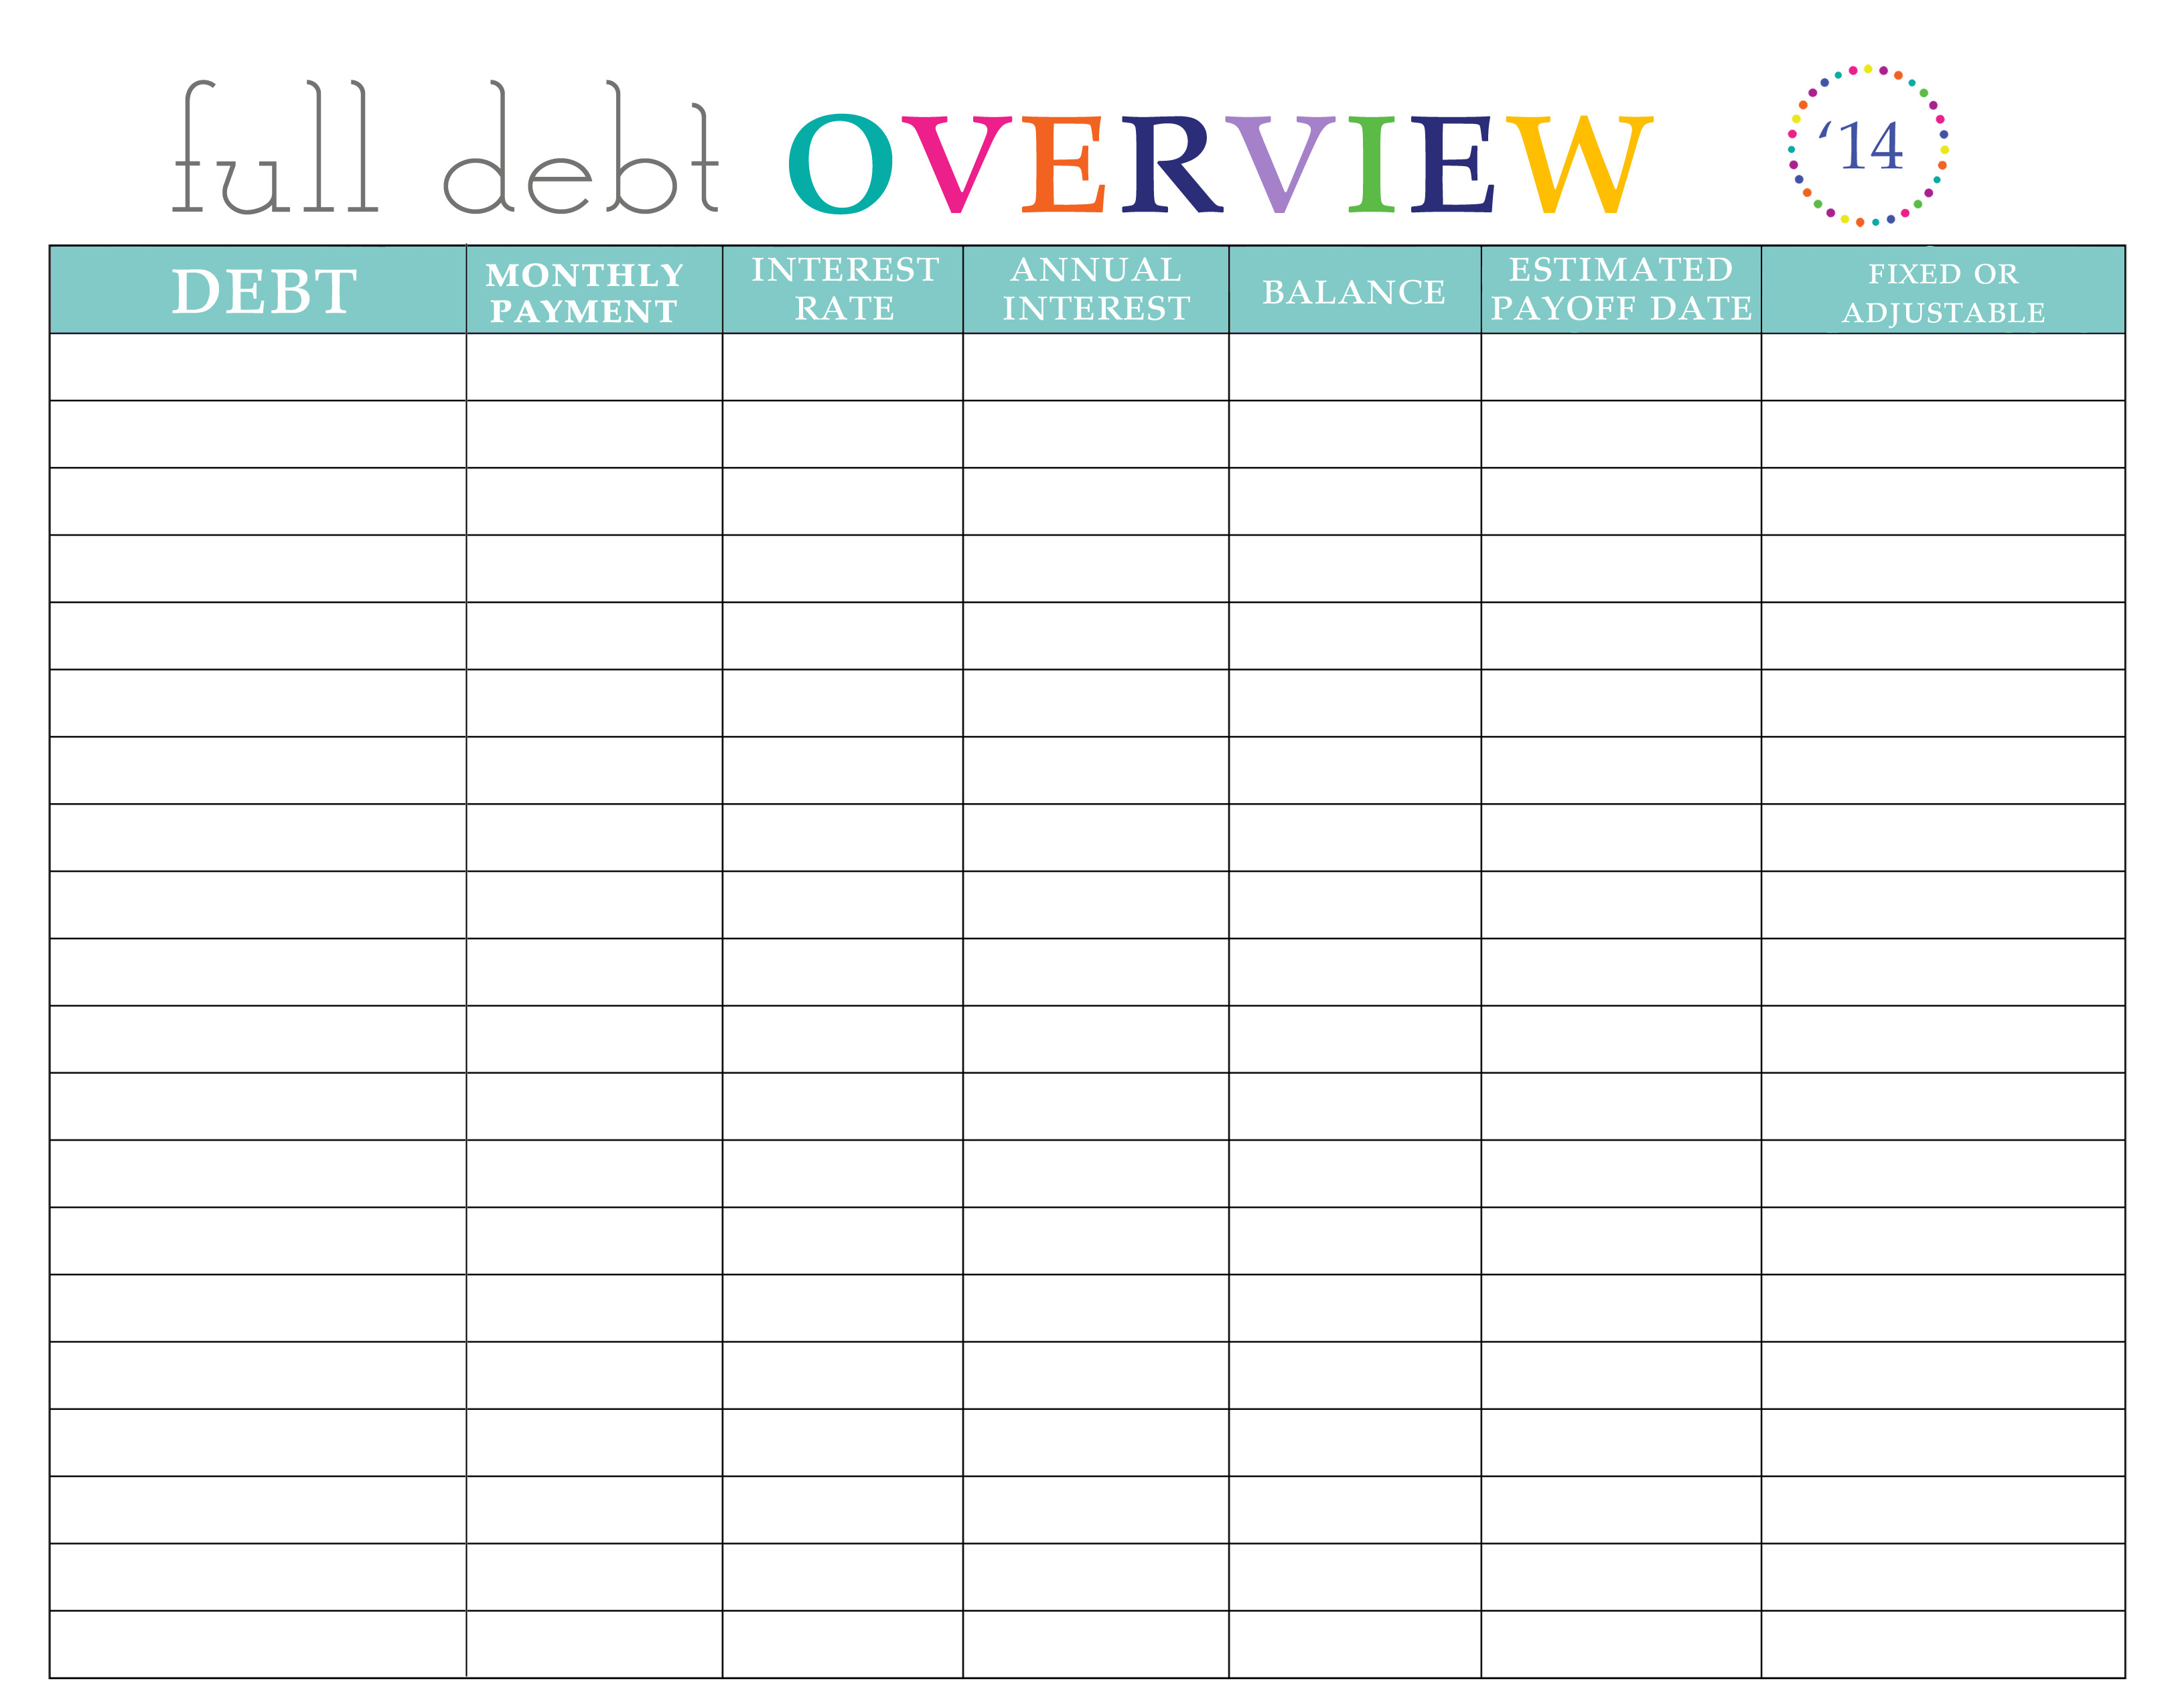 Free Accounting Spreadsheet Templates For Small Business | My ... Or Free Accounting Spreadsheet For Small Business